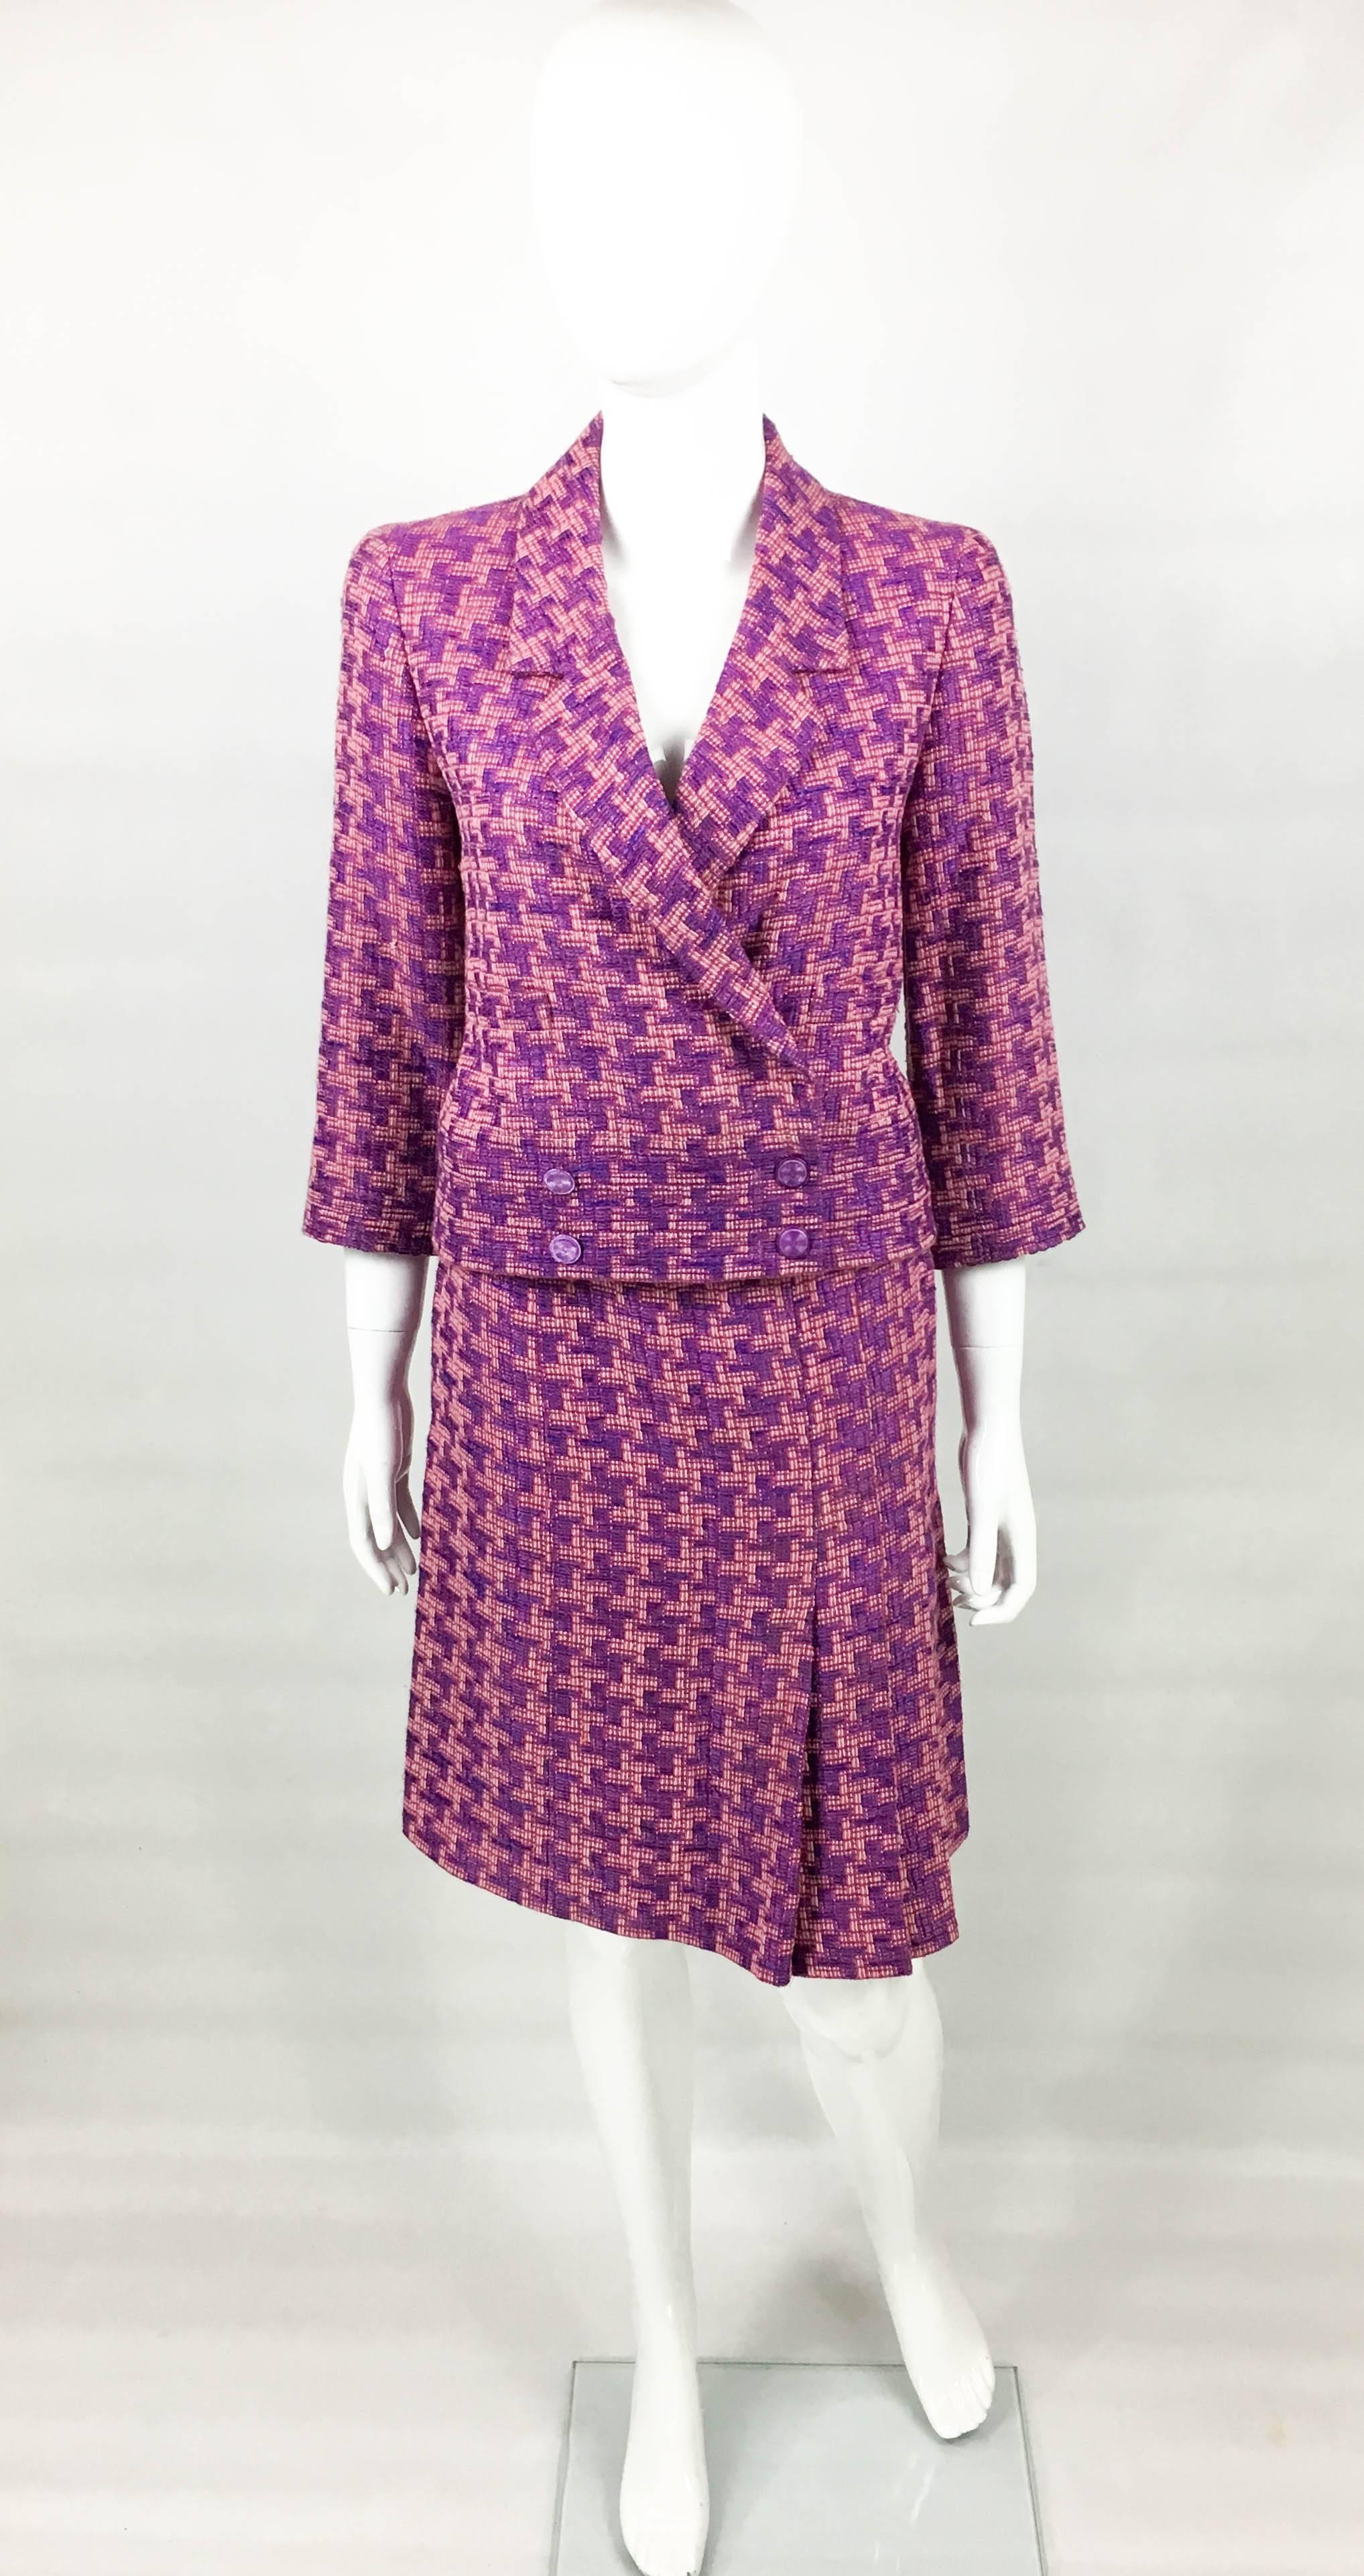 Vintage Chanel Bouclé Skirt Suit. This beautiful suit by Chanel was made for the 2001 Spring / Summer Collection. Made in a purple and pink b	ouclé, it is lined in silk. The double-breasted jacket has 4 purple logo buttons on the front. The